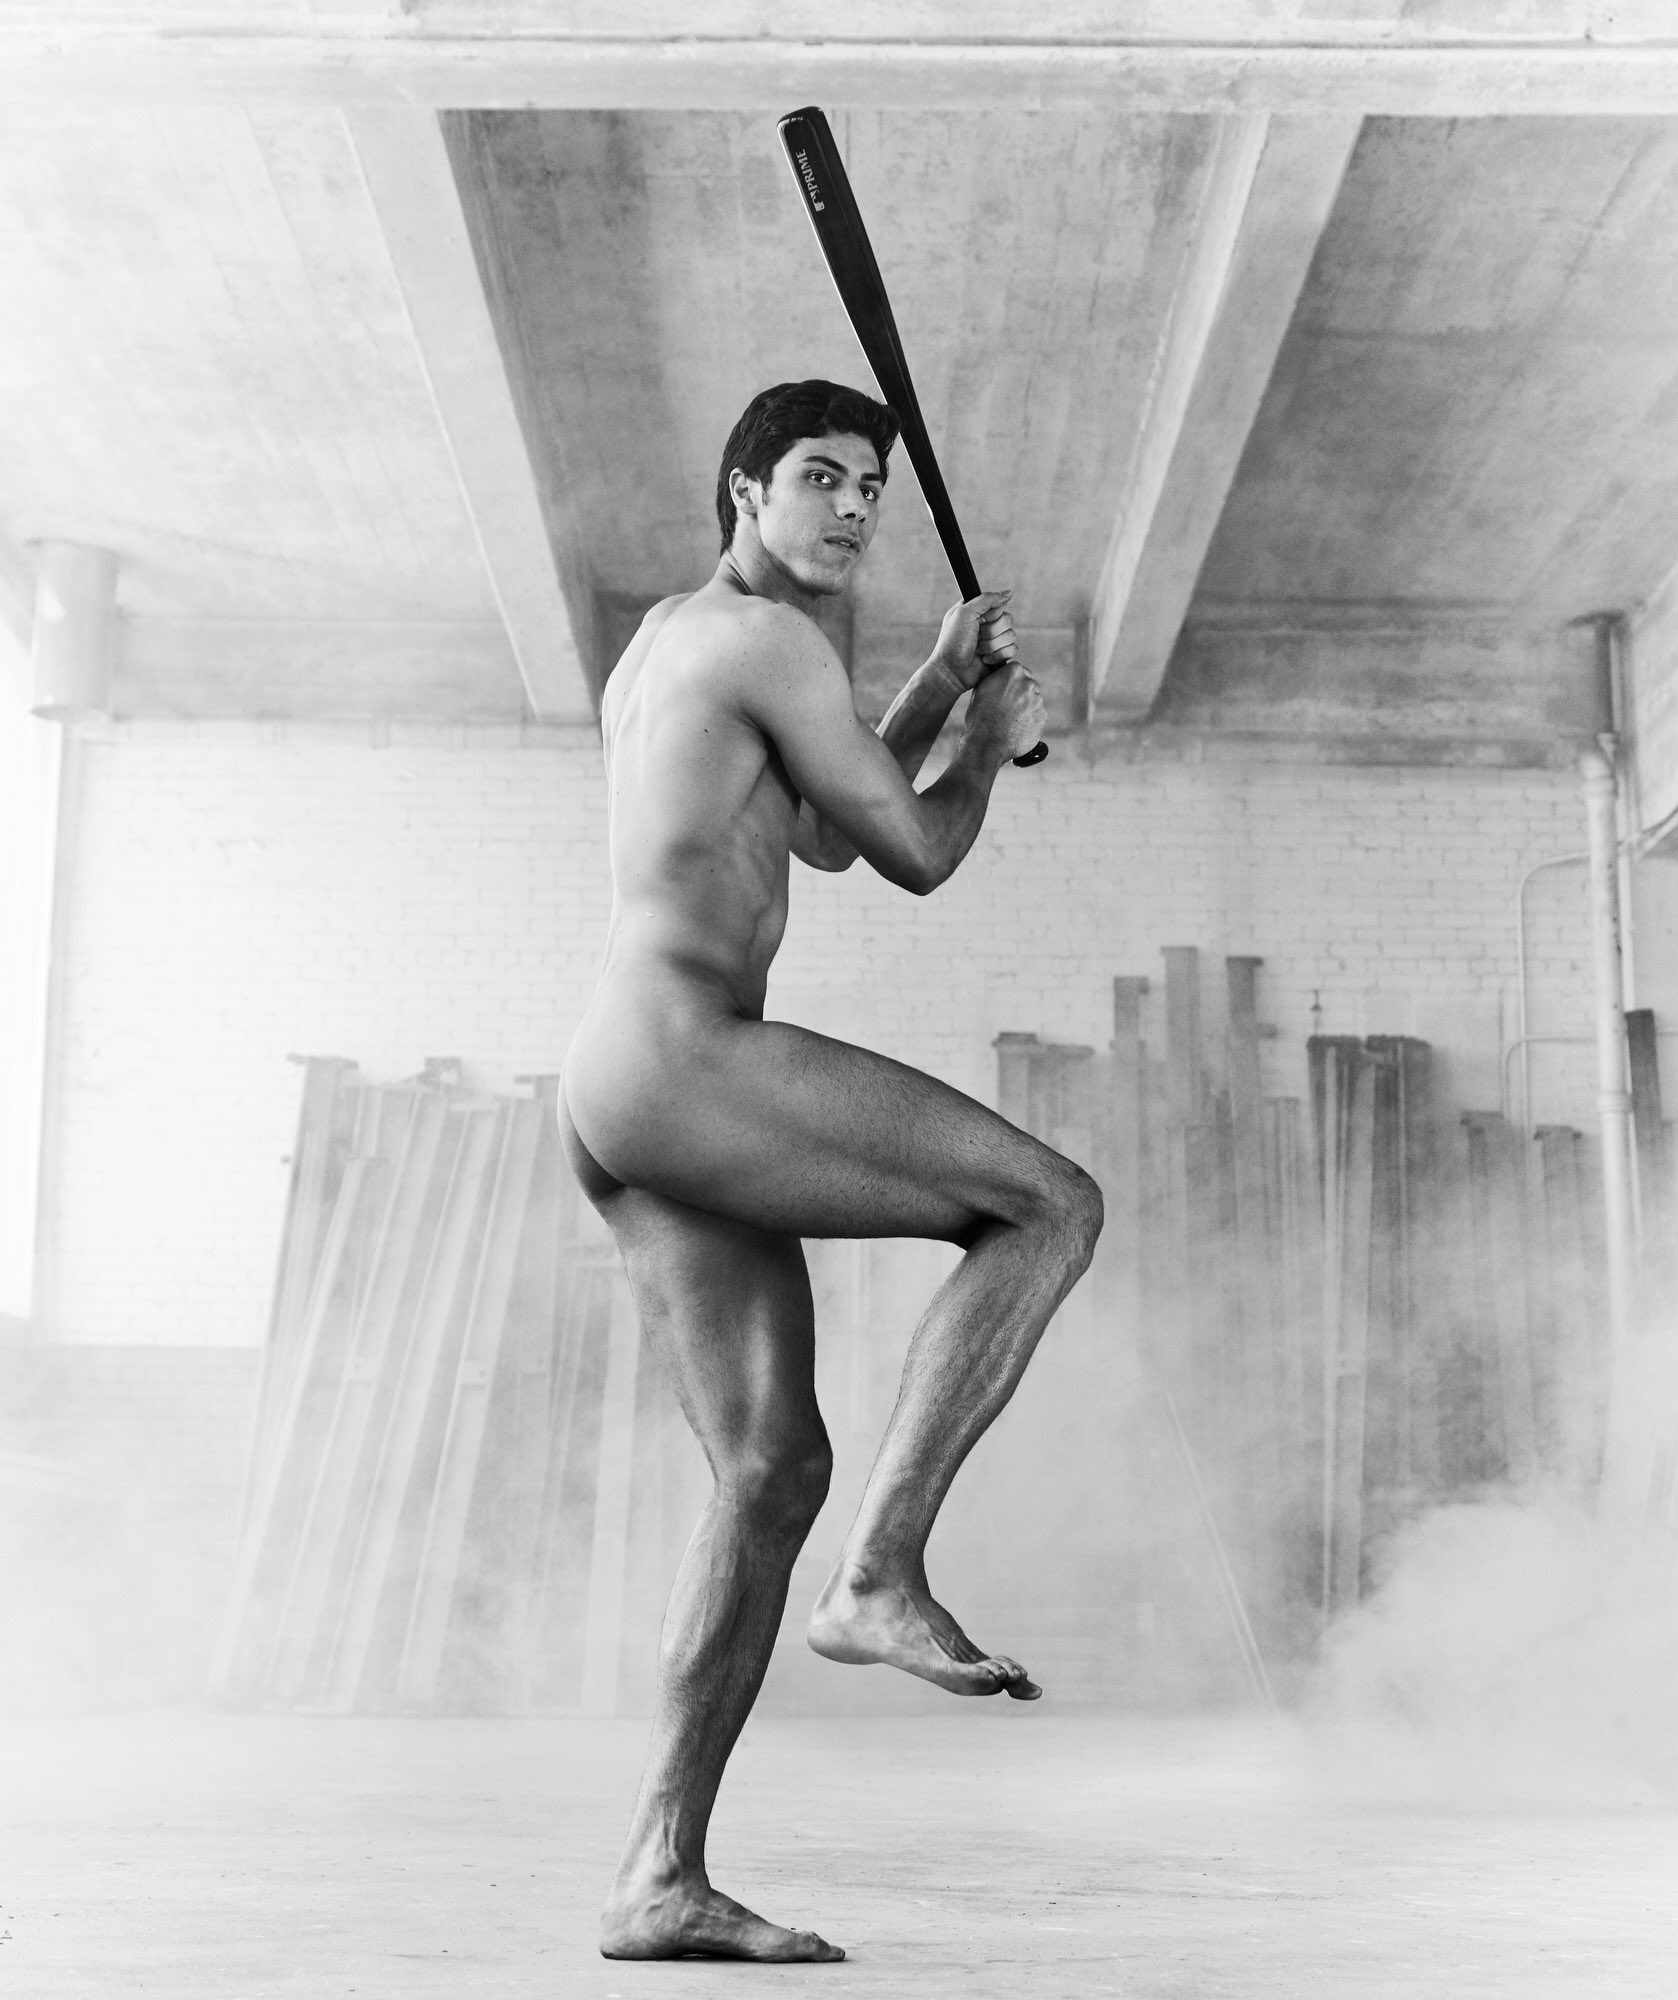 Milwaukee Brewers on X: Looking for @ChristianYelich's #BodyIssue